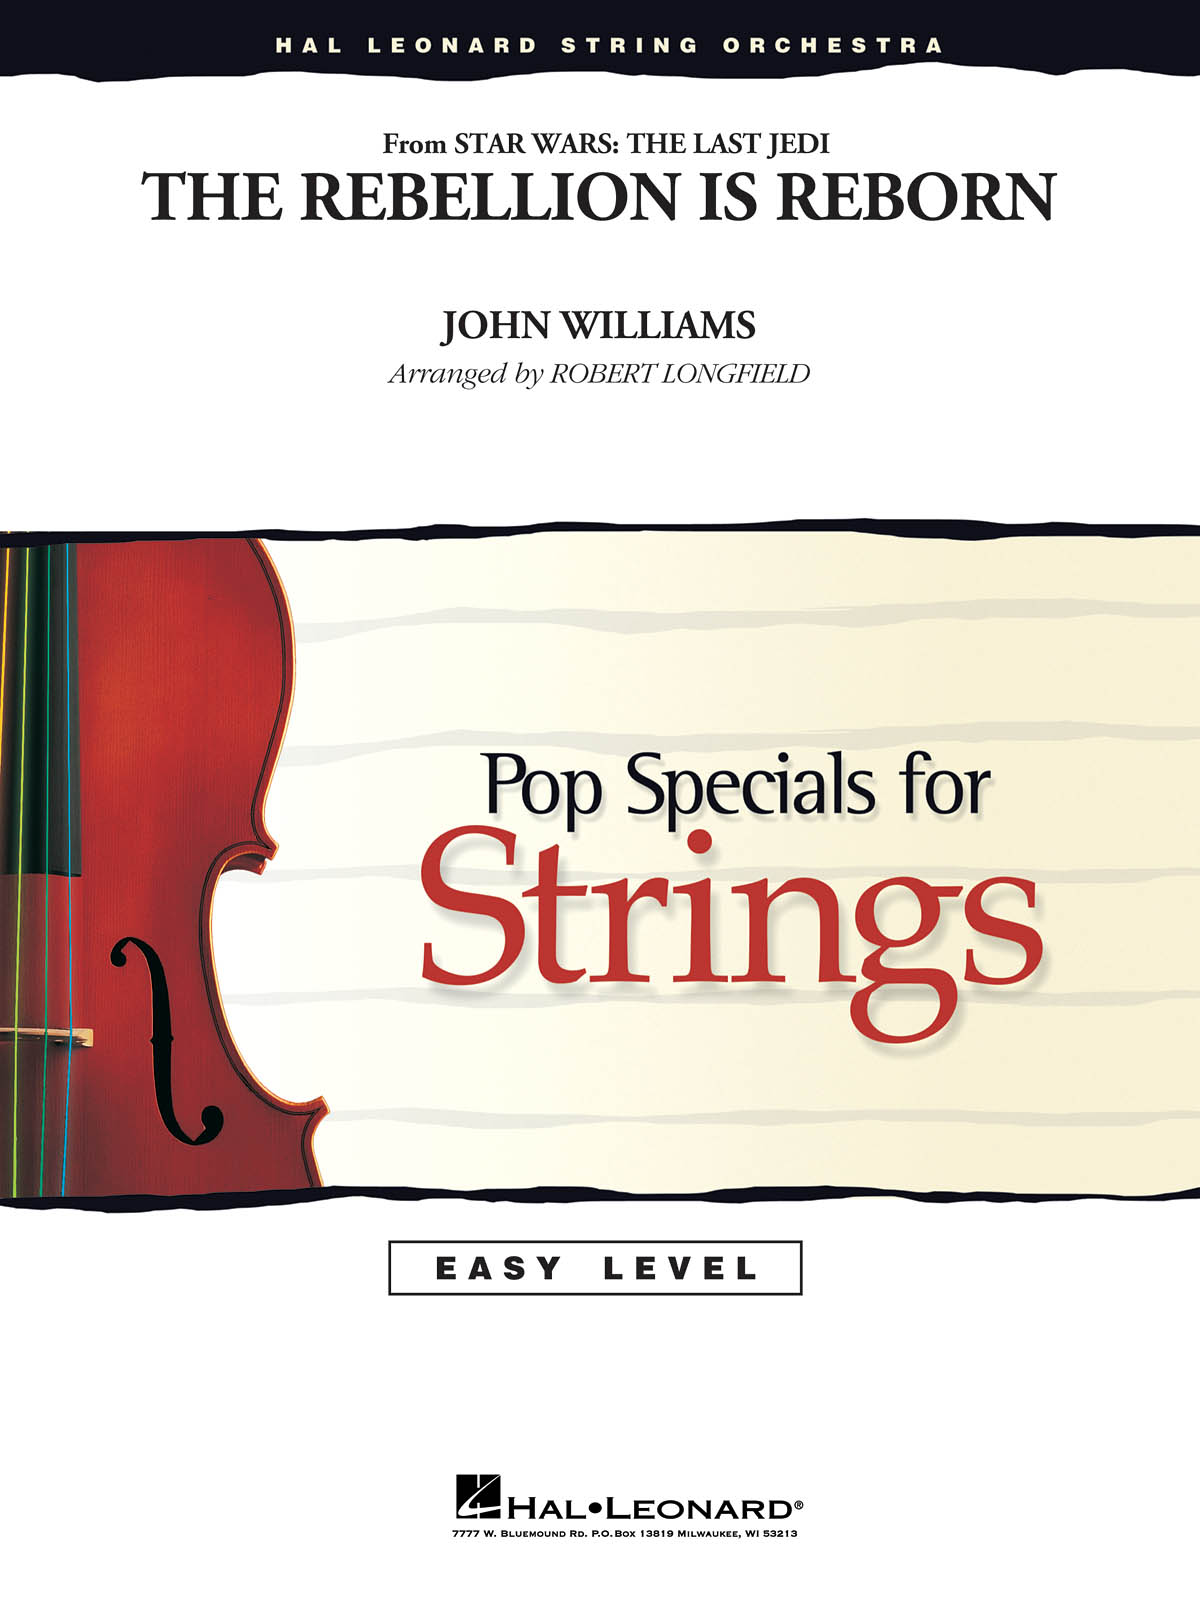 The Rebellion is Born from Star Wars The Last Jedi for String Orchestra (Easy) Score + Parts